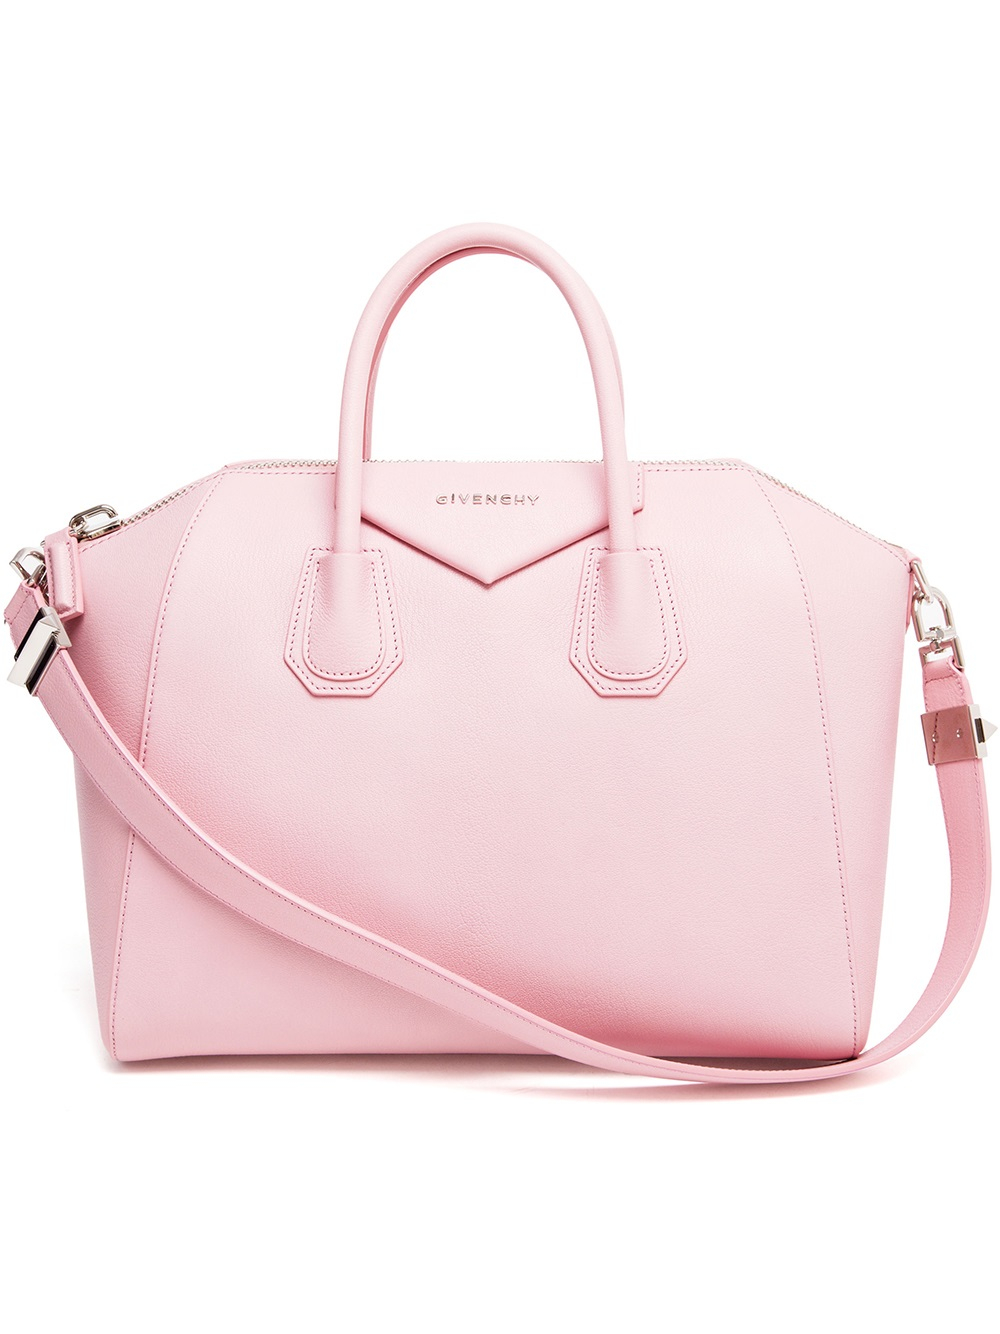 Lyst - Givenchy Antigona Grained Leather Tote Bag in Pink